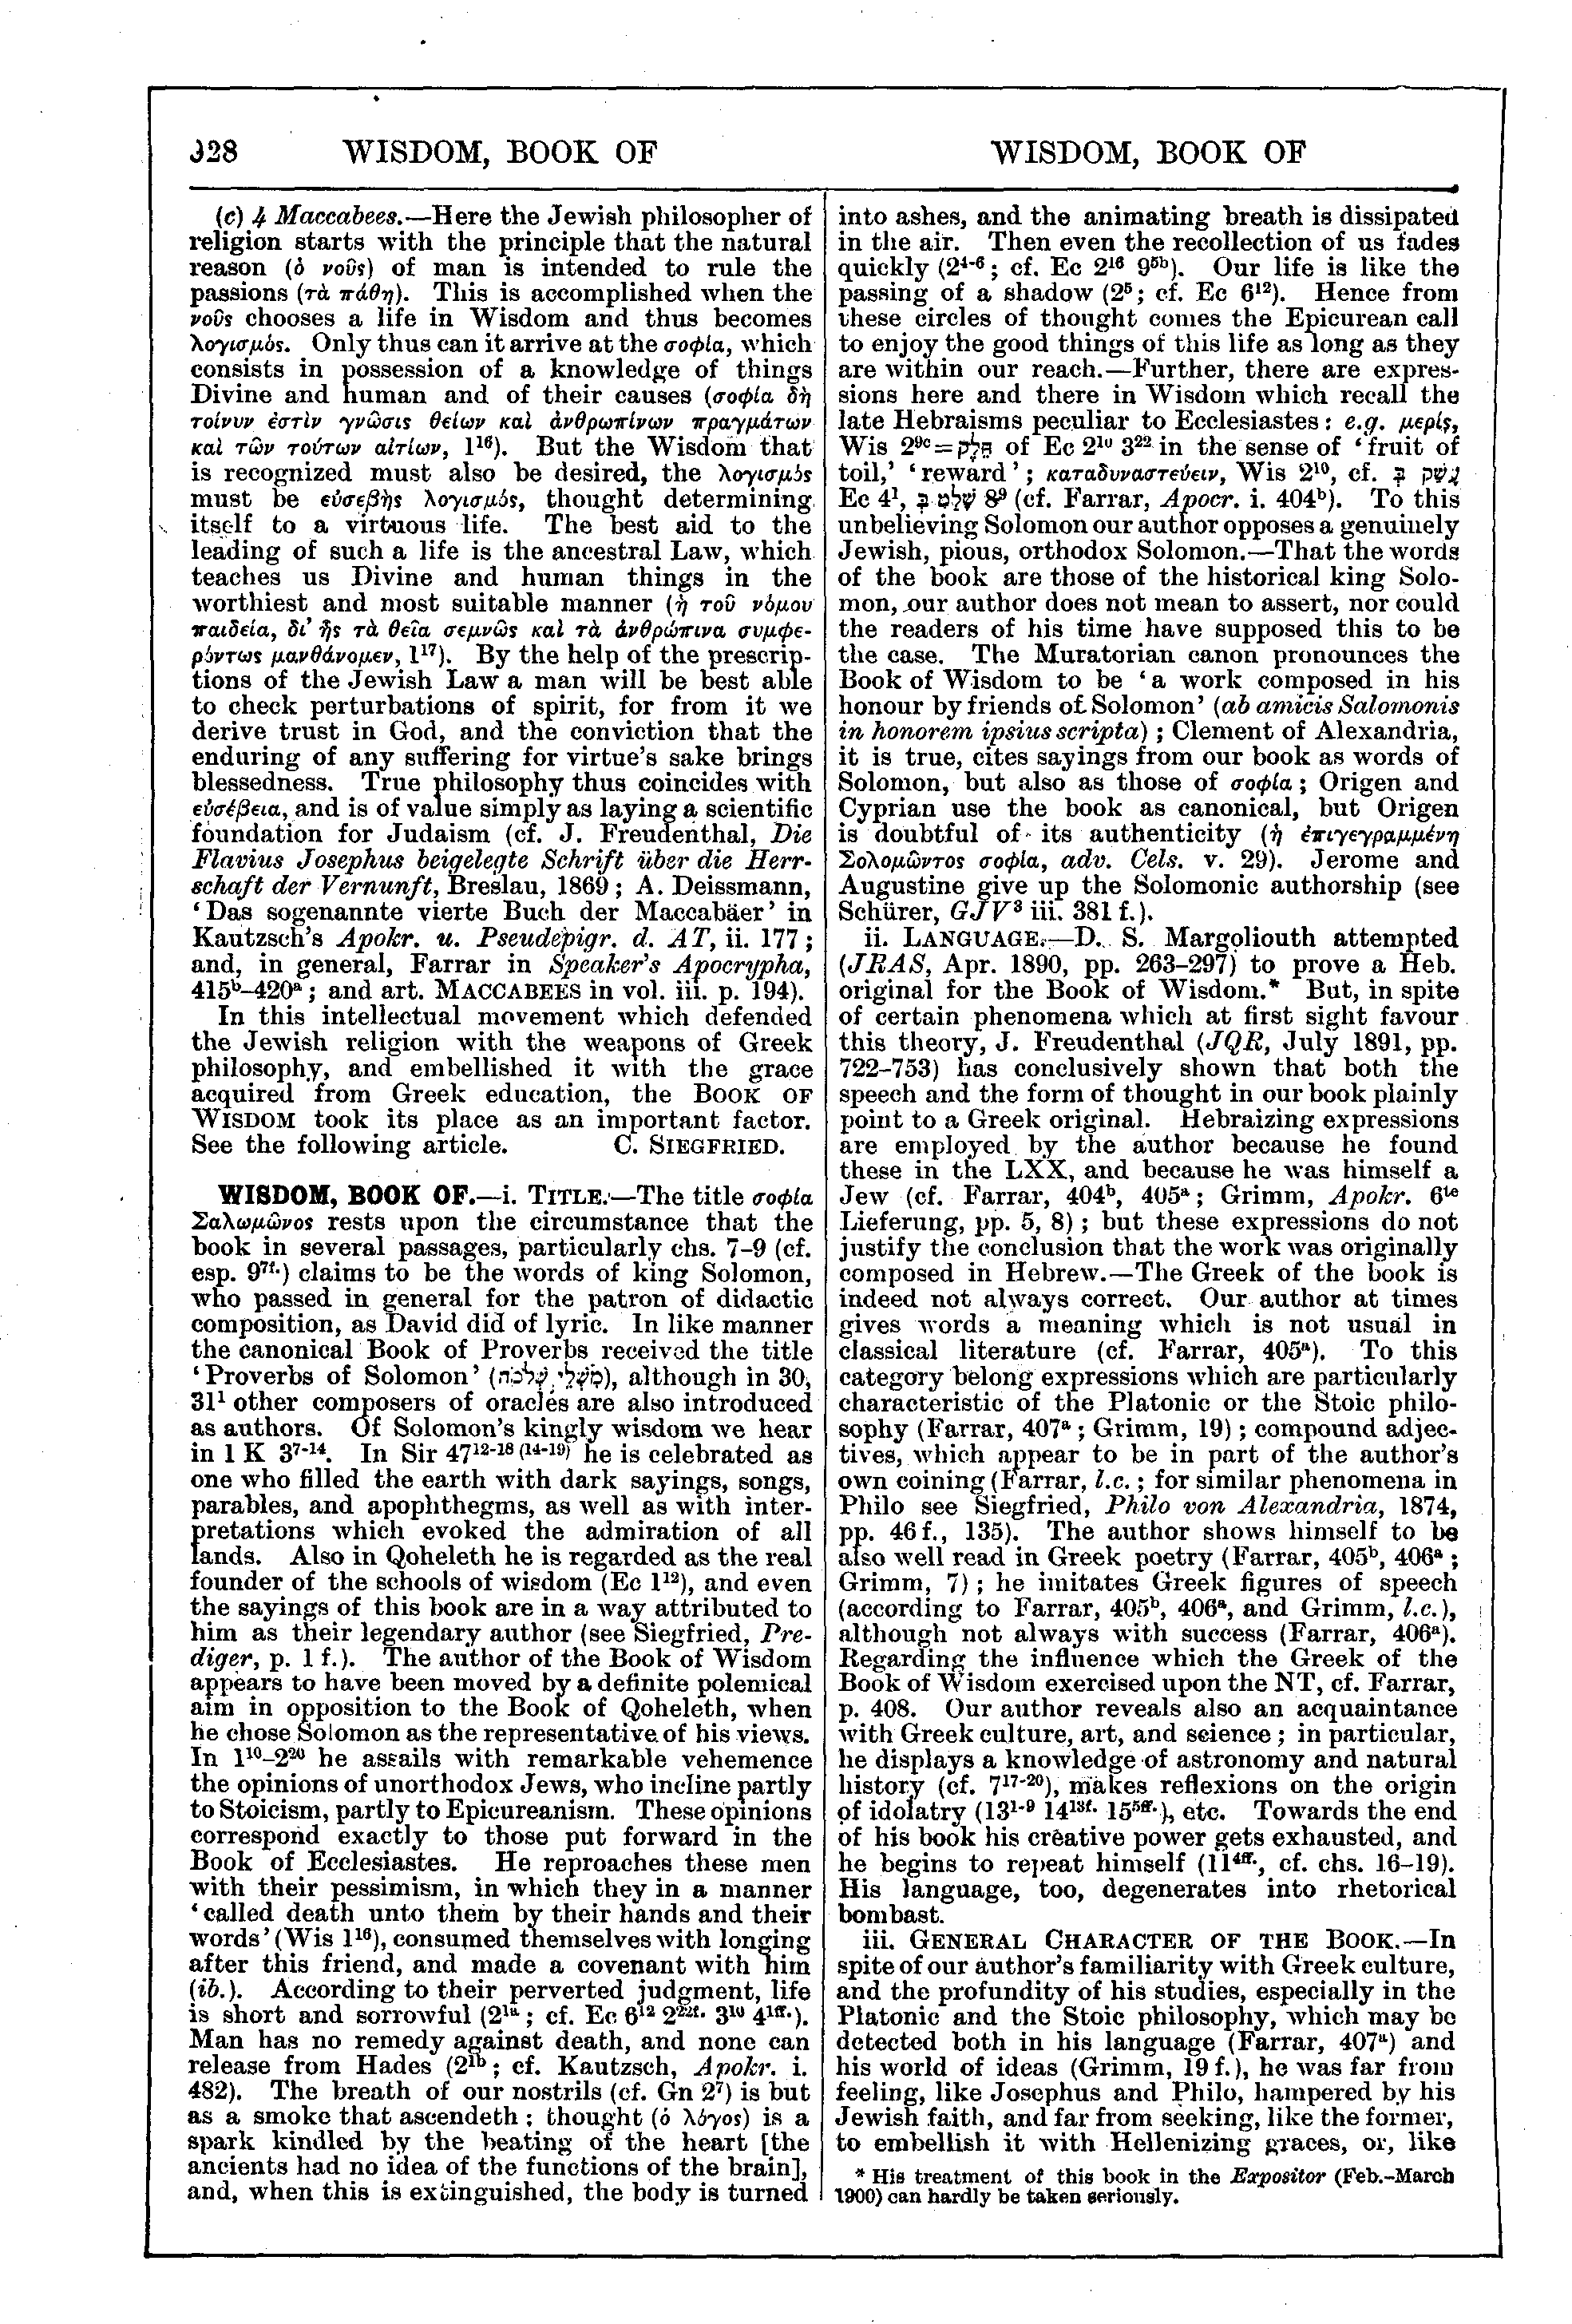 Image of page 928